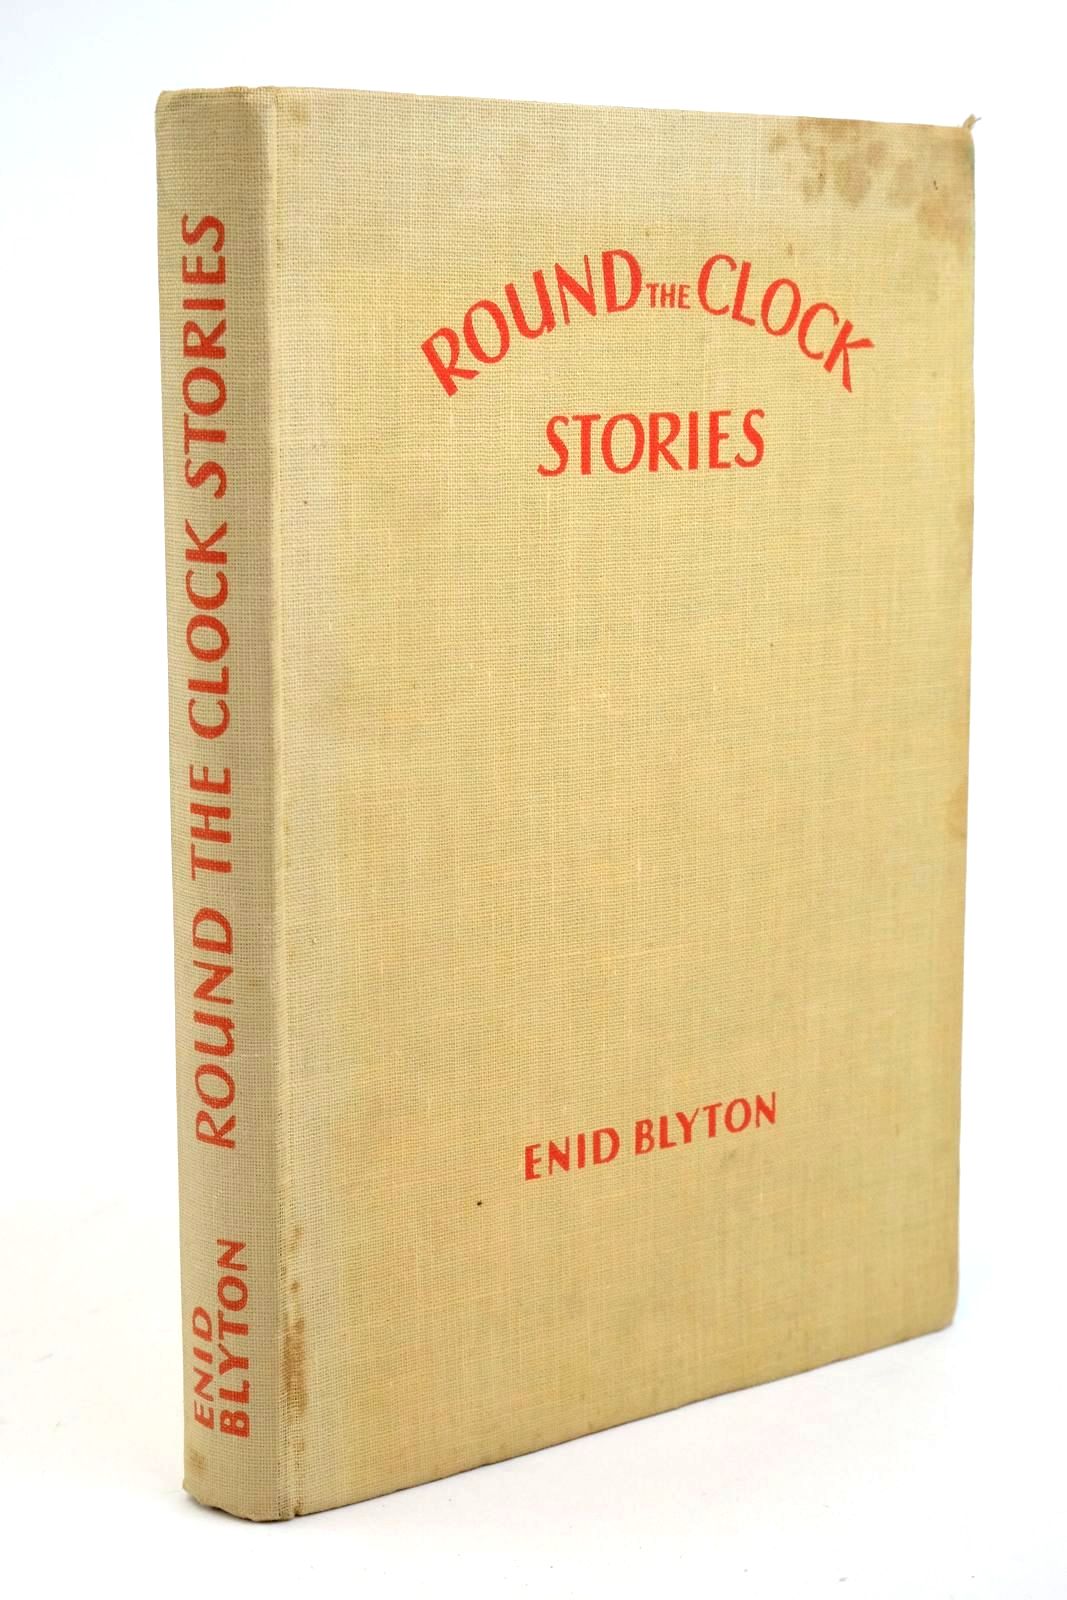 Photo of ROUND THE CLOCK STORIES written by Blyton, Enid illustrated by Unwin, Nora published by The National Magazine Co. Ltd. (STOCK CODE: 1321808)  for sale by Stella & Rose's Books